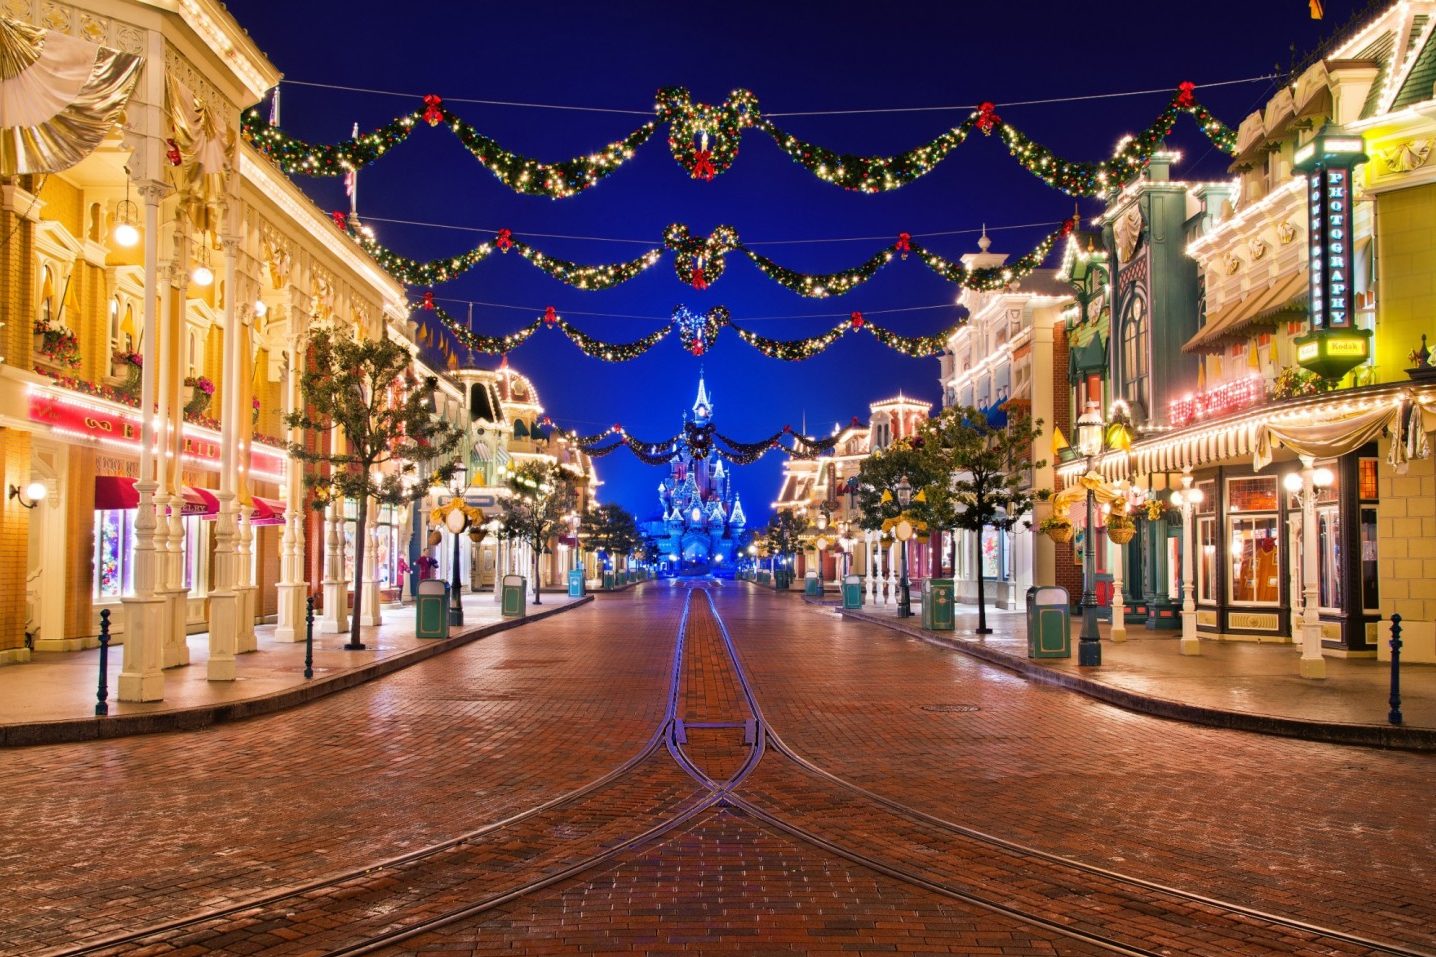  Disneyland Christmas Decorations for Small Space